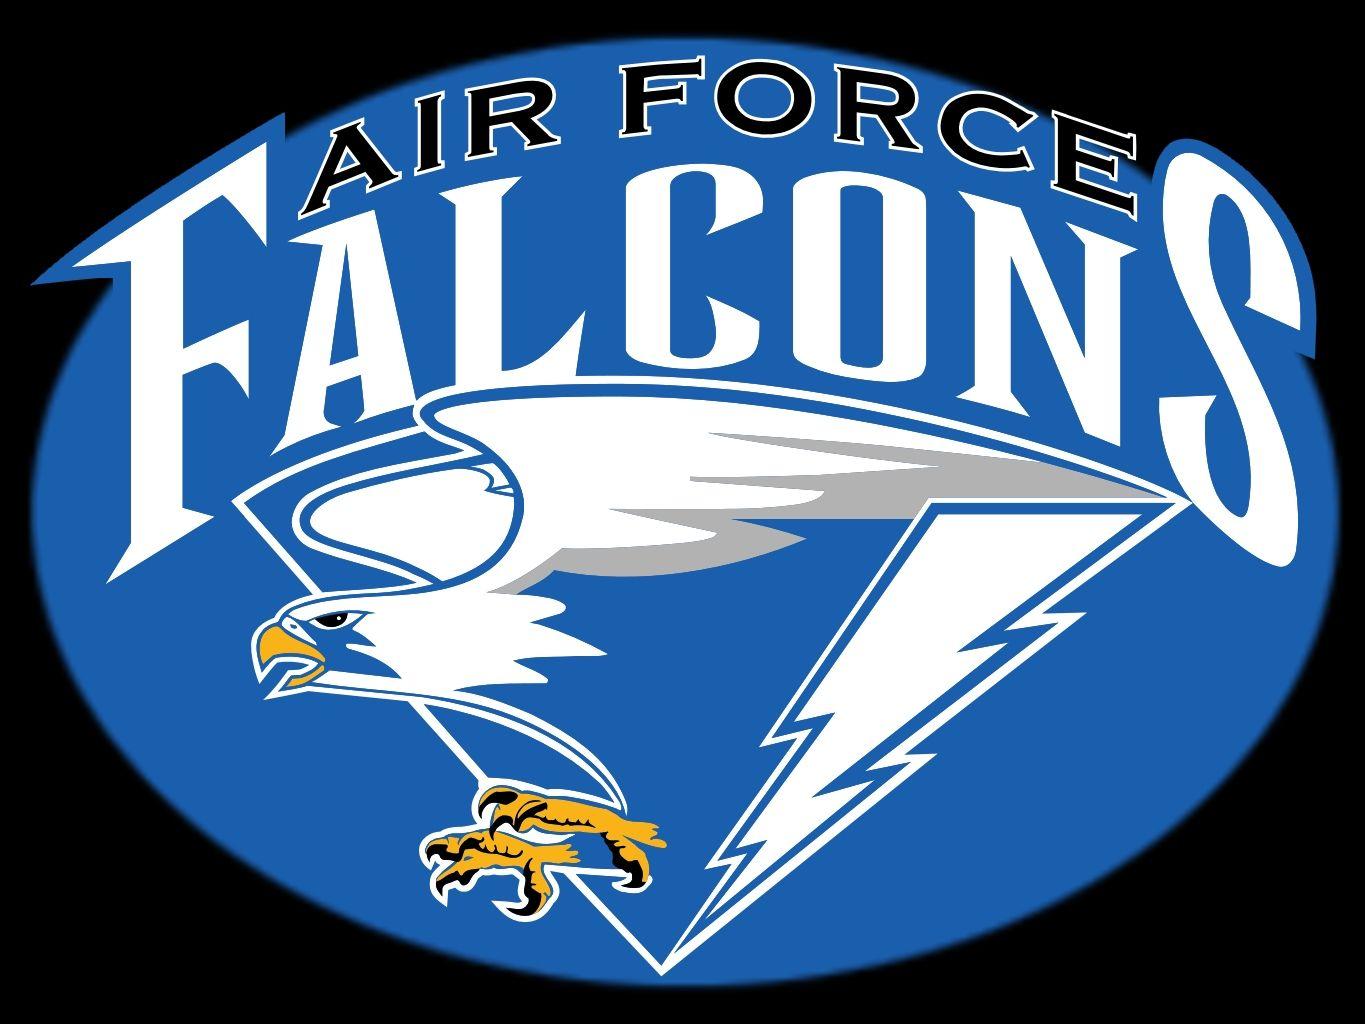 Air Force Falcons Logo - Air Force Falcons. Wallpaper and Cover Photo. Falcons